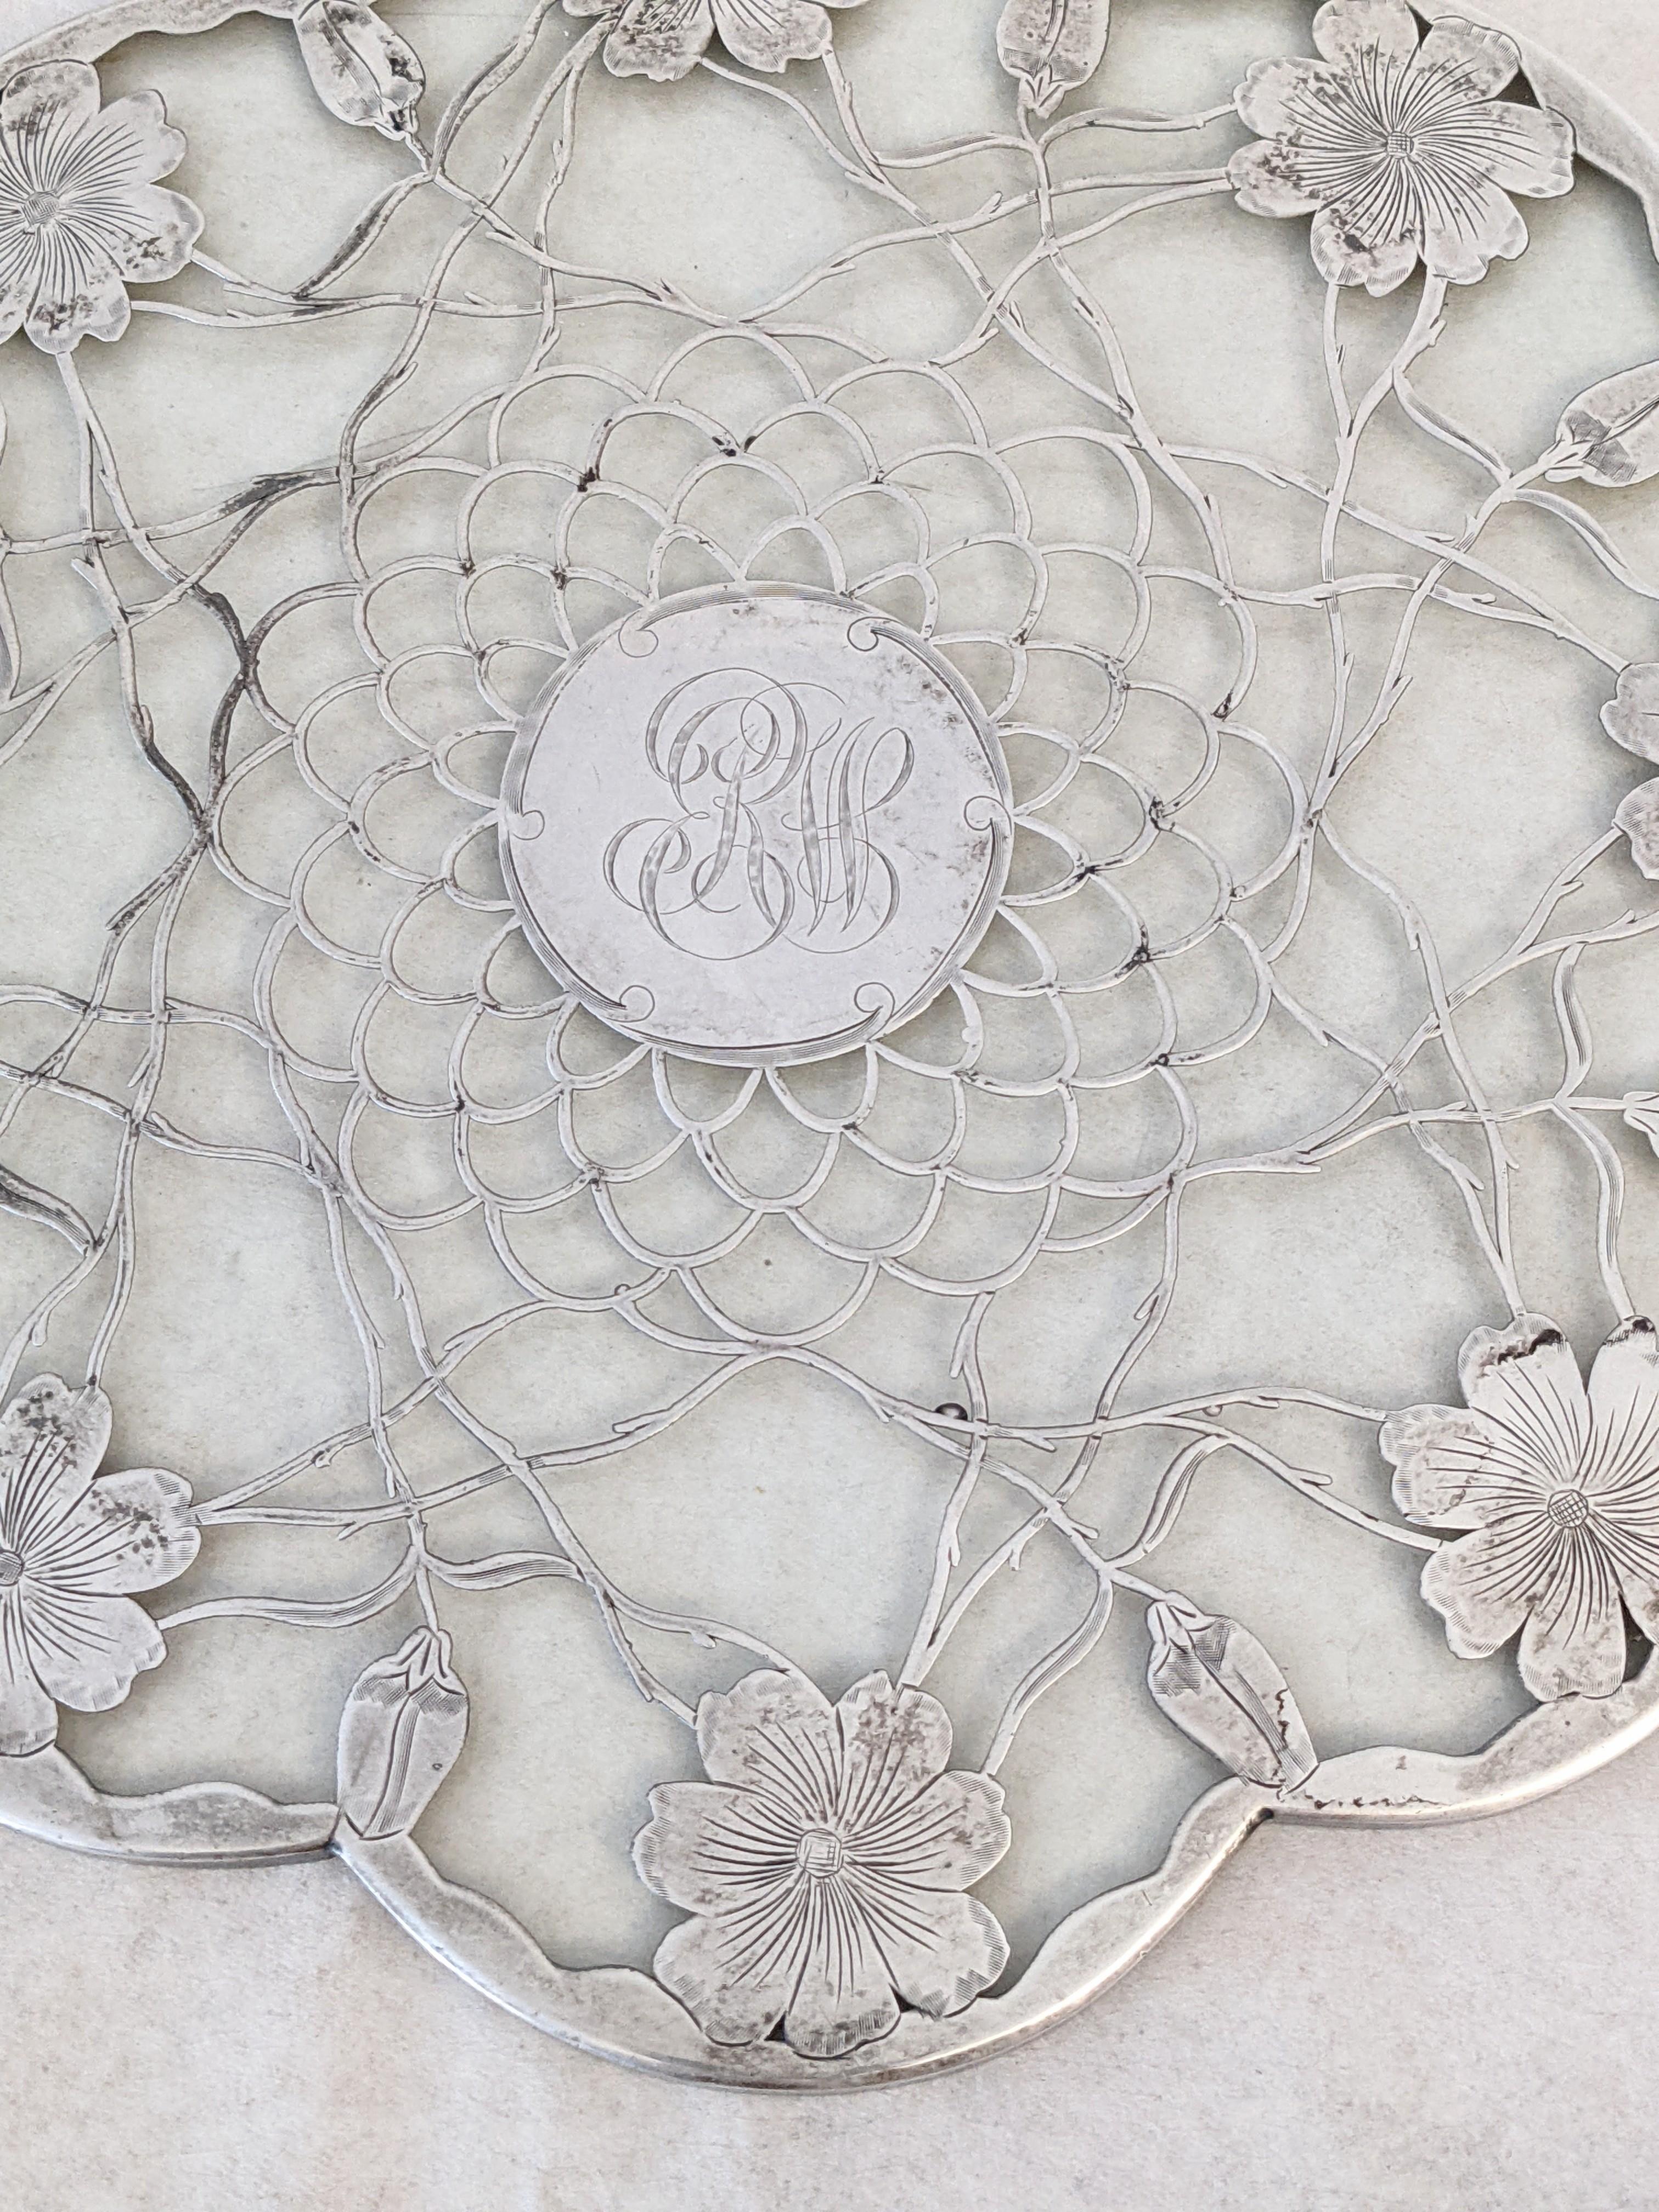 Silver Overlay Art Nouveau Trivet In Excellent Condition For Sale In Riverdale, NY